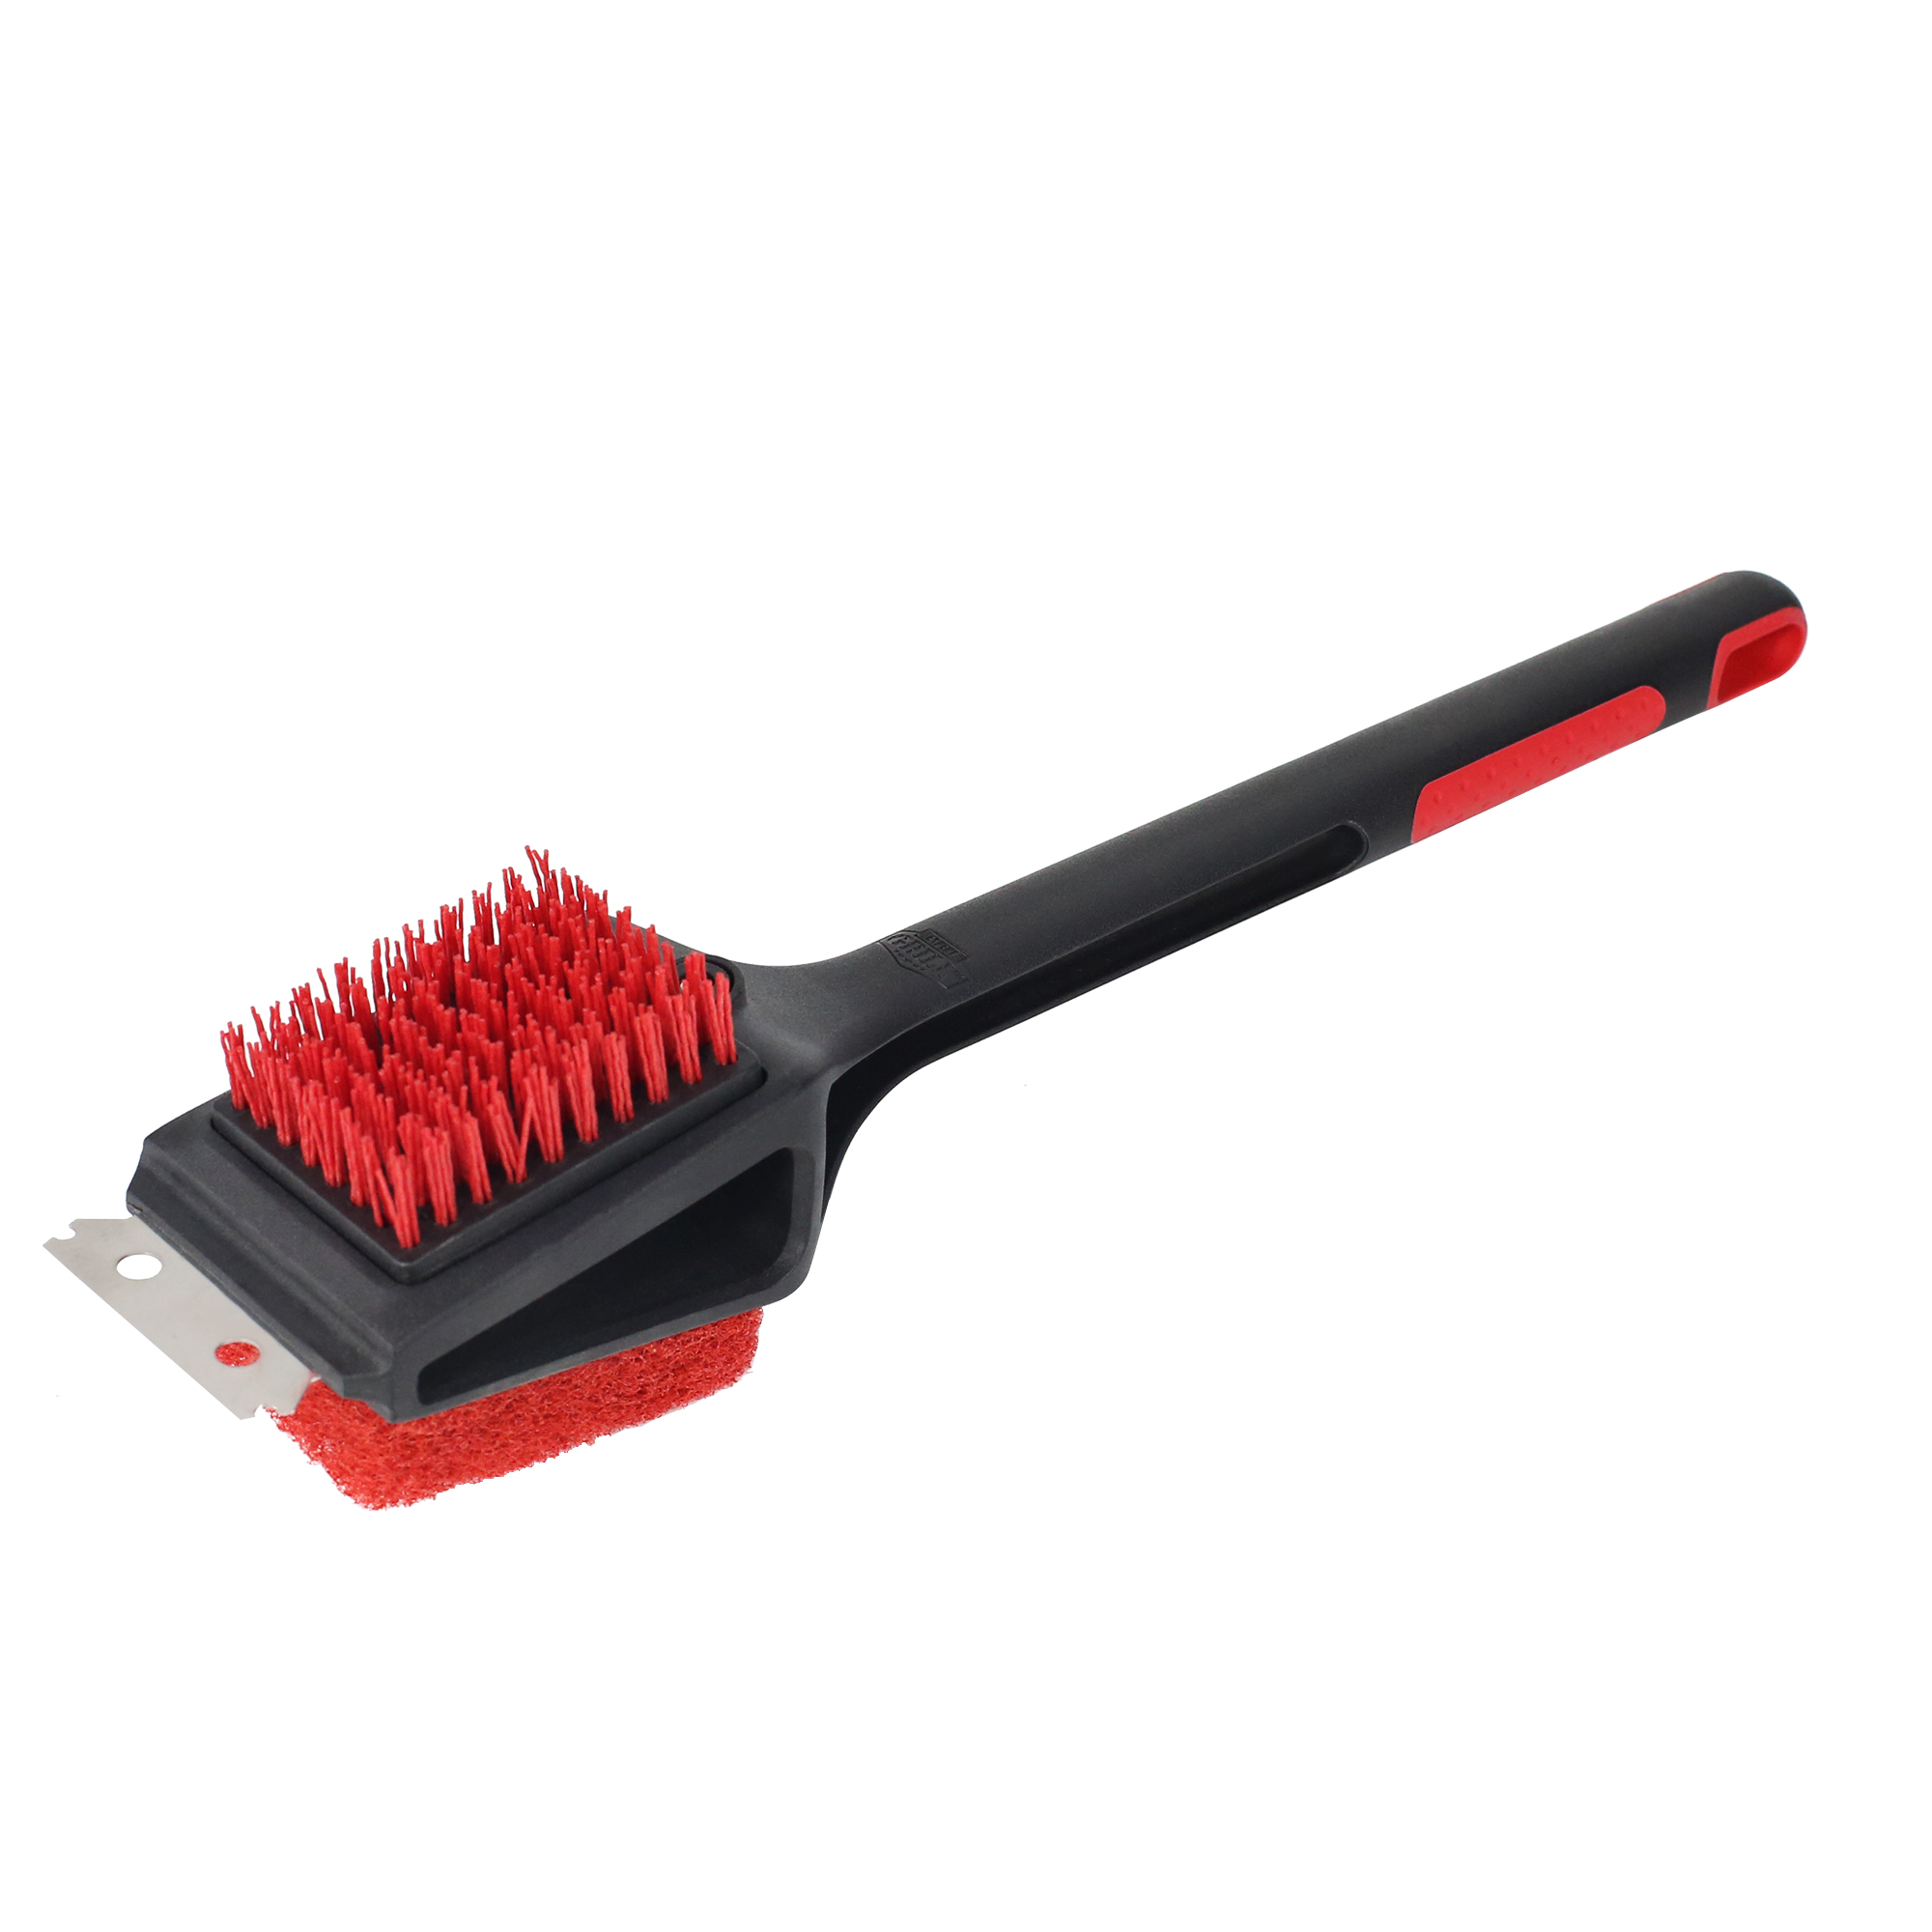 Expert Grill 3 in 1 Cleaning Cold Grill Brush with Stainless Steel Scraper - image 1 of 10